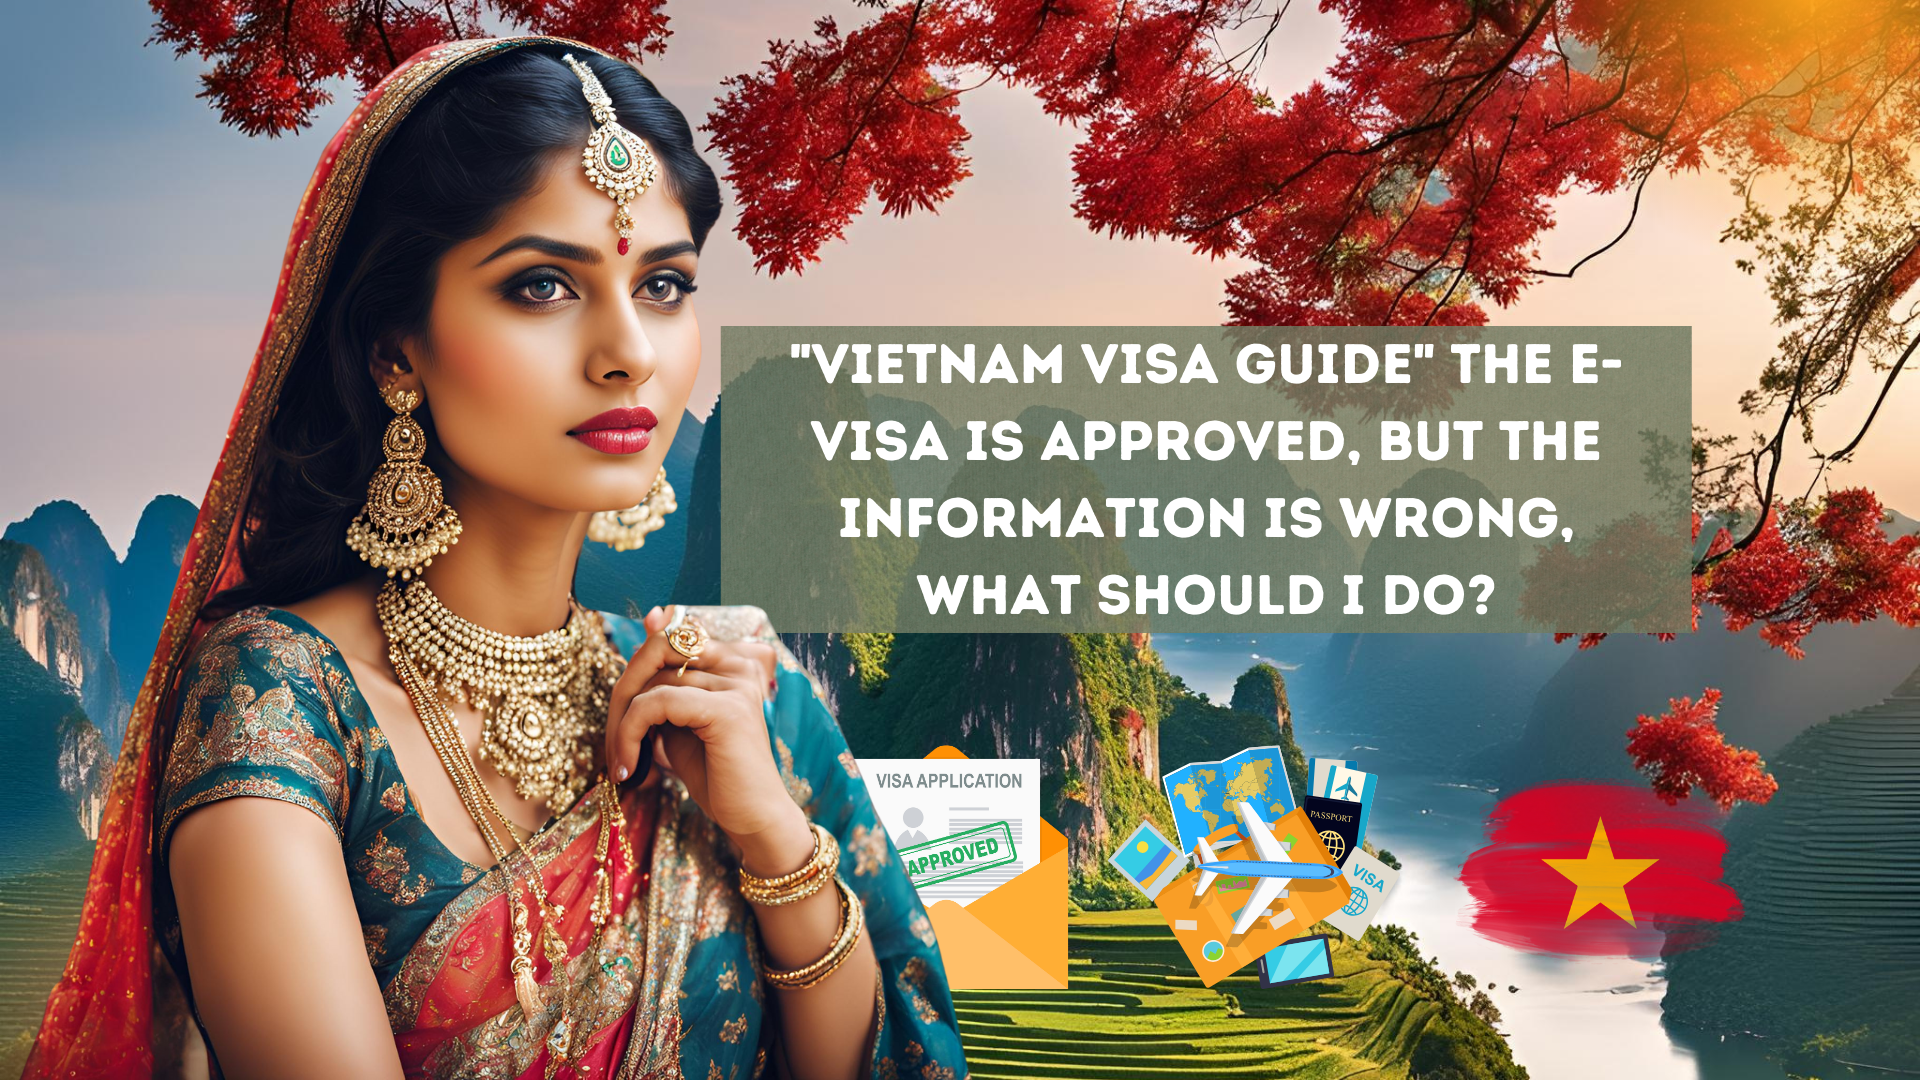 "Vietnam Visa Guide" The e-visa is approved, but the information is wrong, what should I do?